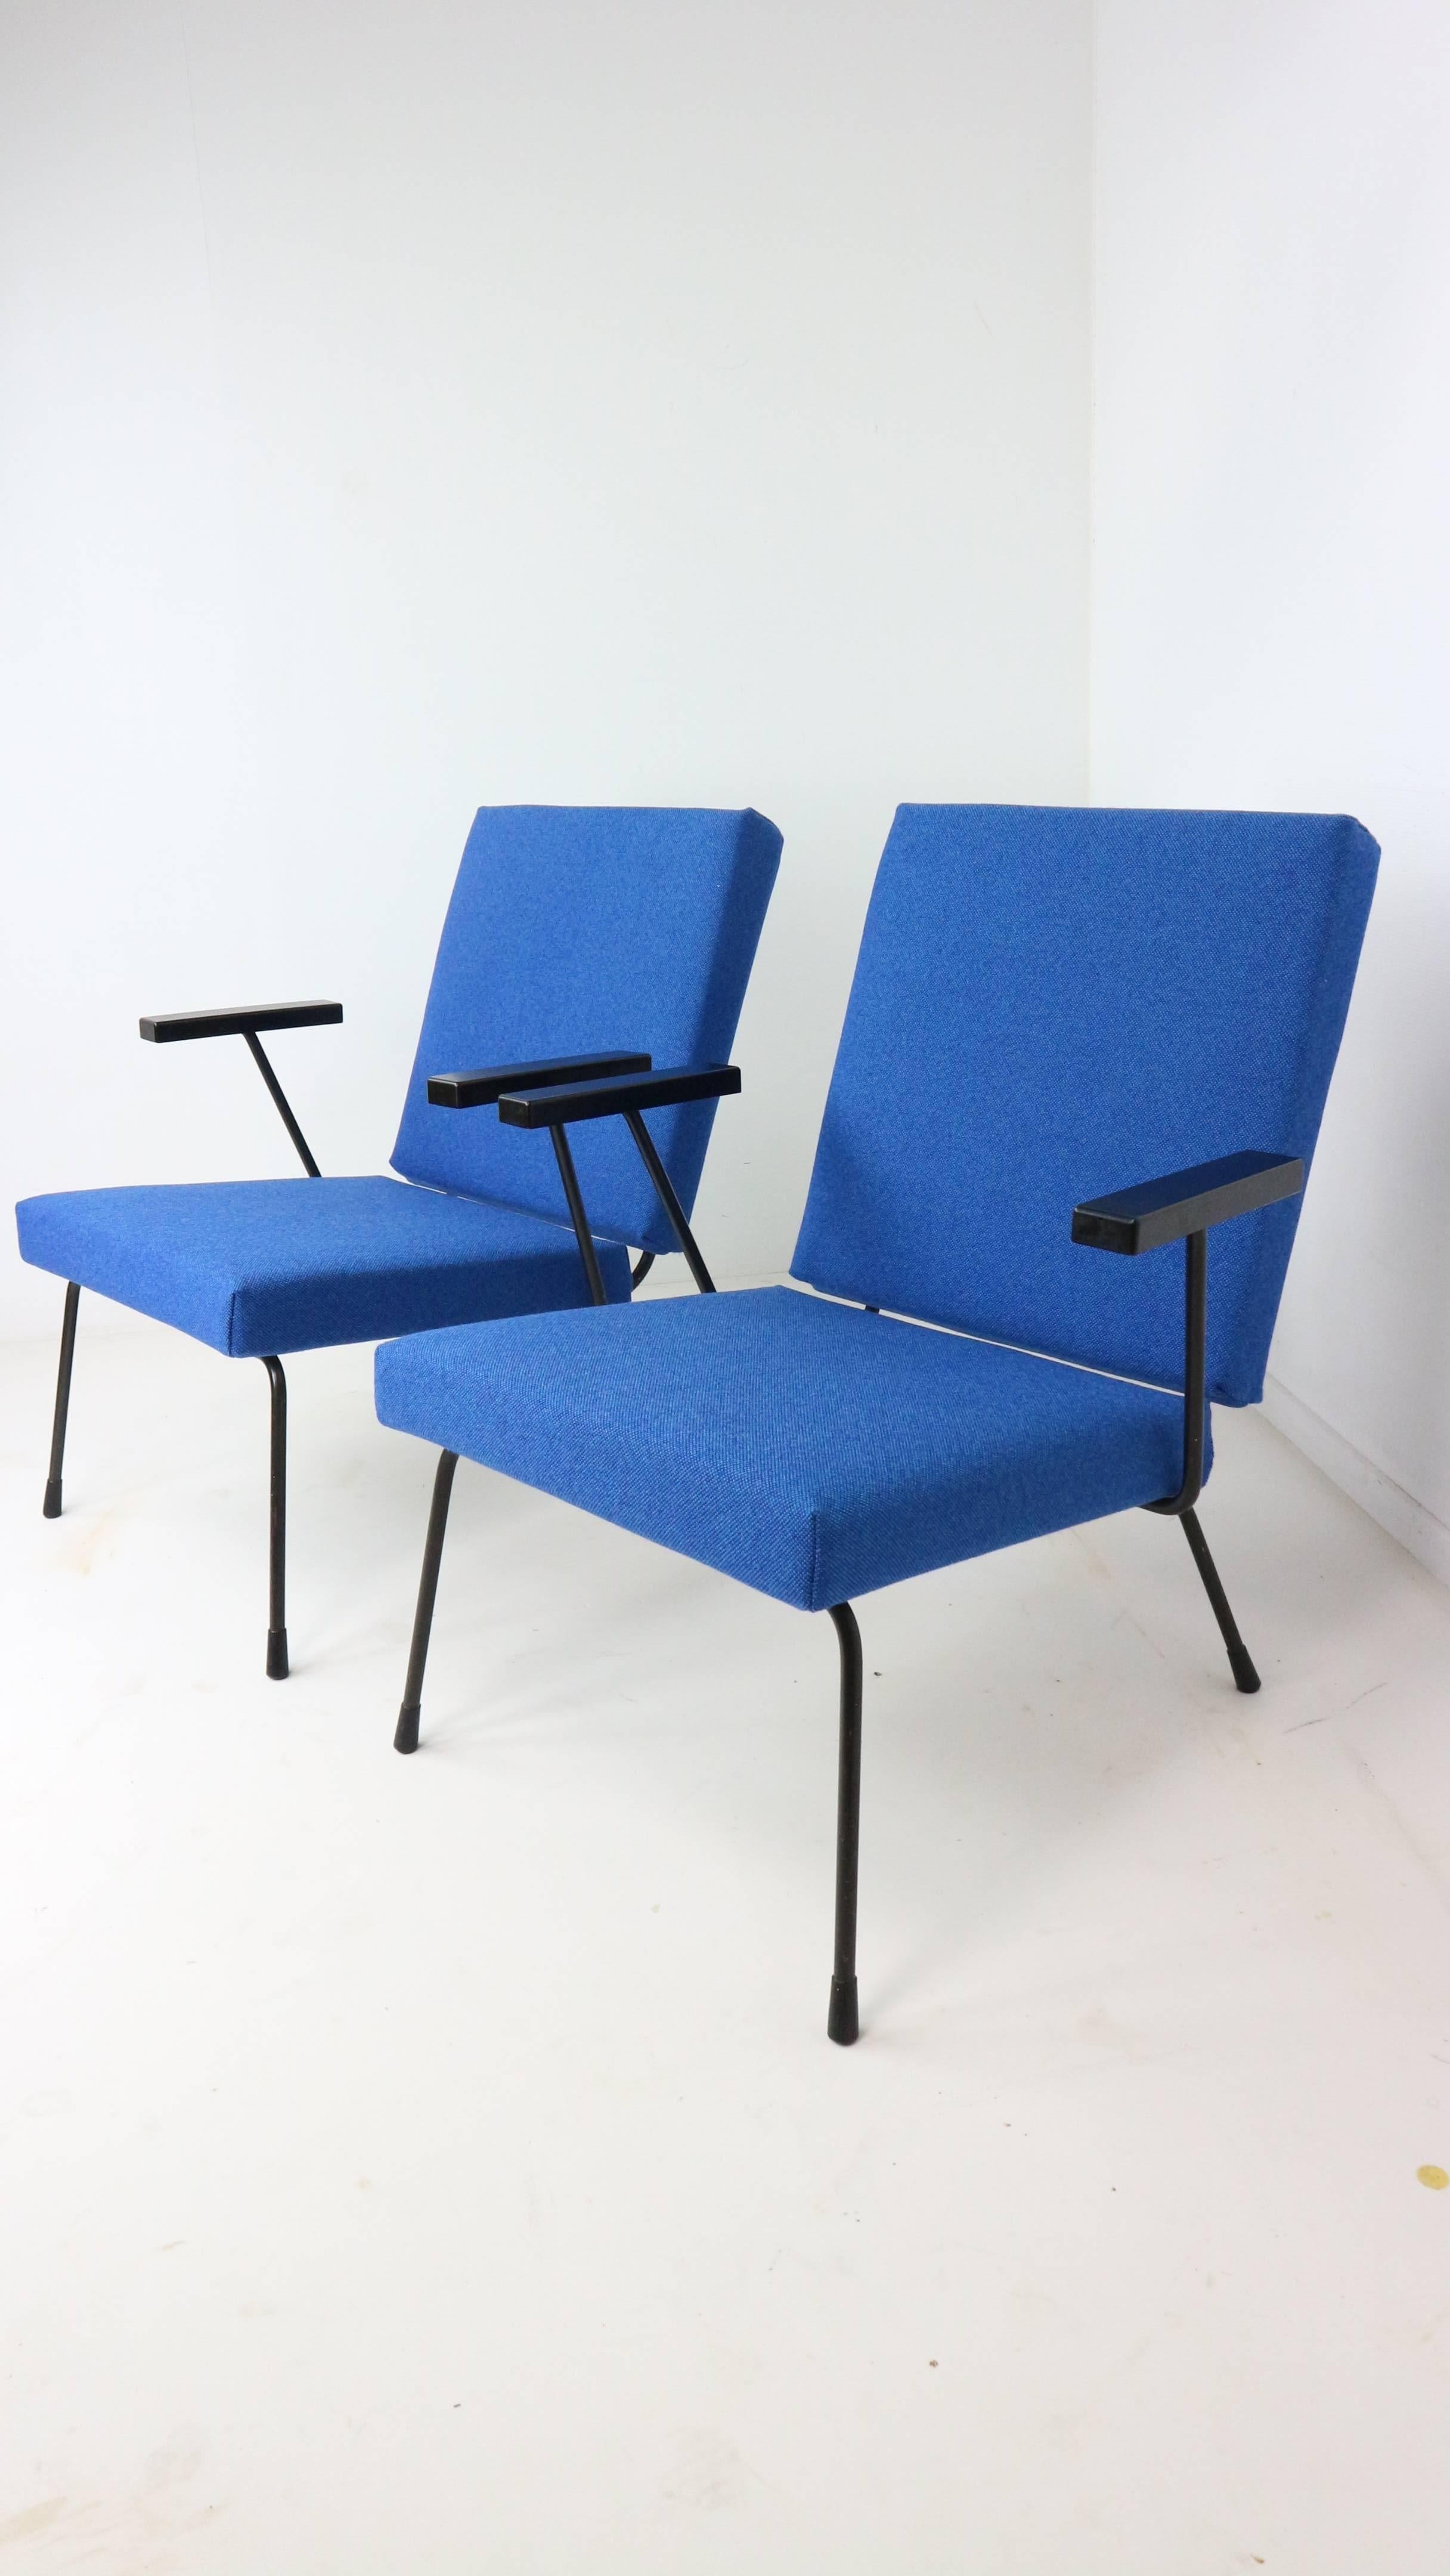 W. Rietveld and A.R. Cordemeyer designed lounge chairs with original black enameled wire frame and bakelite armrests with new matching Kvadrat upholstery.